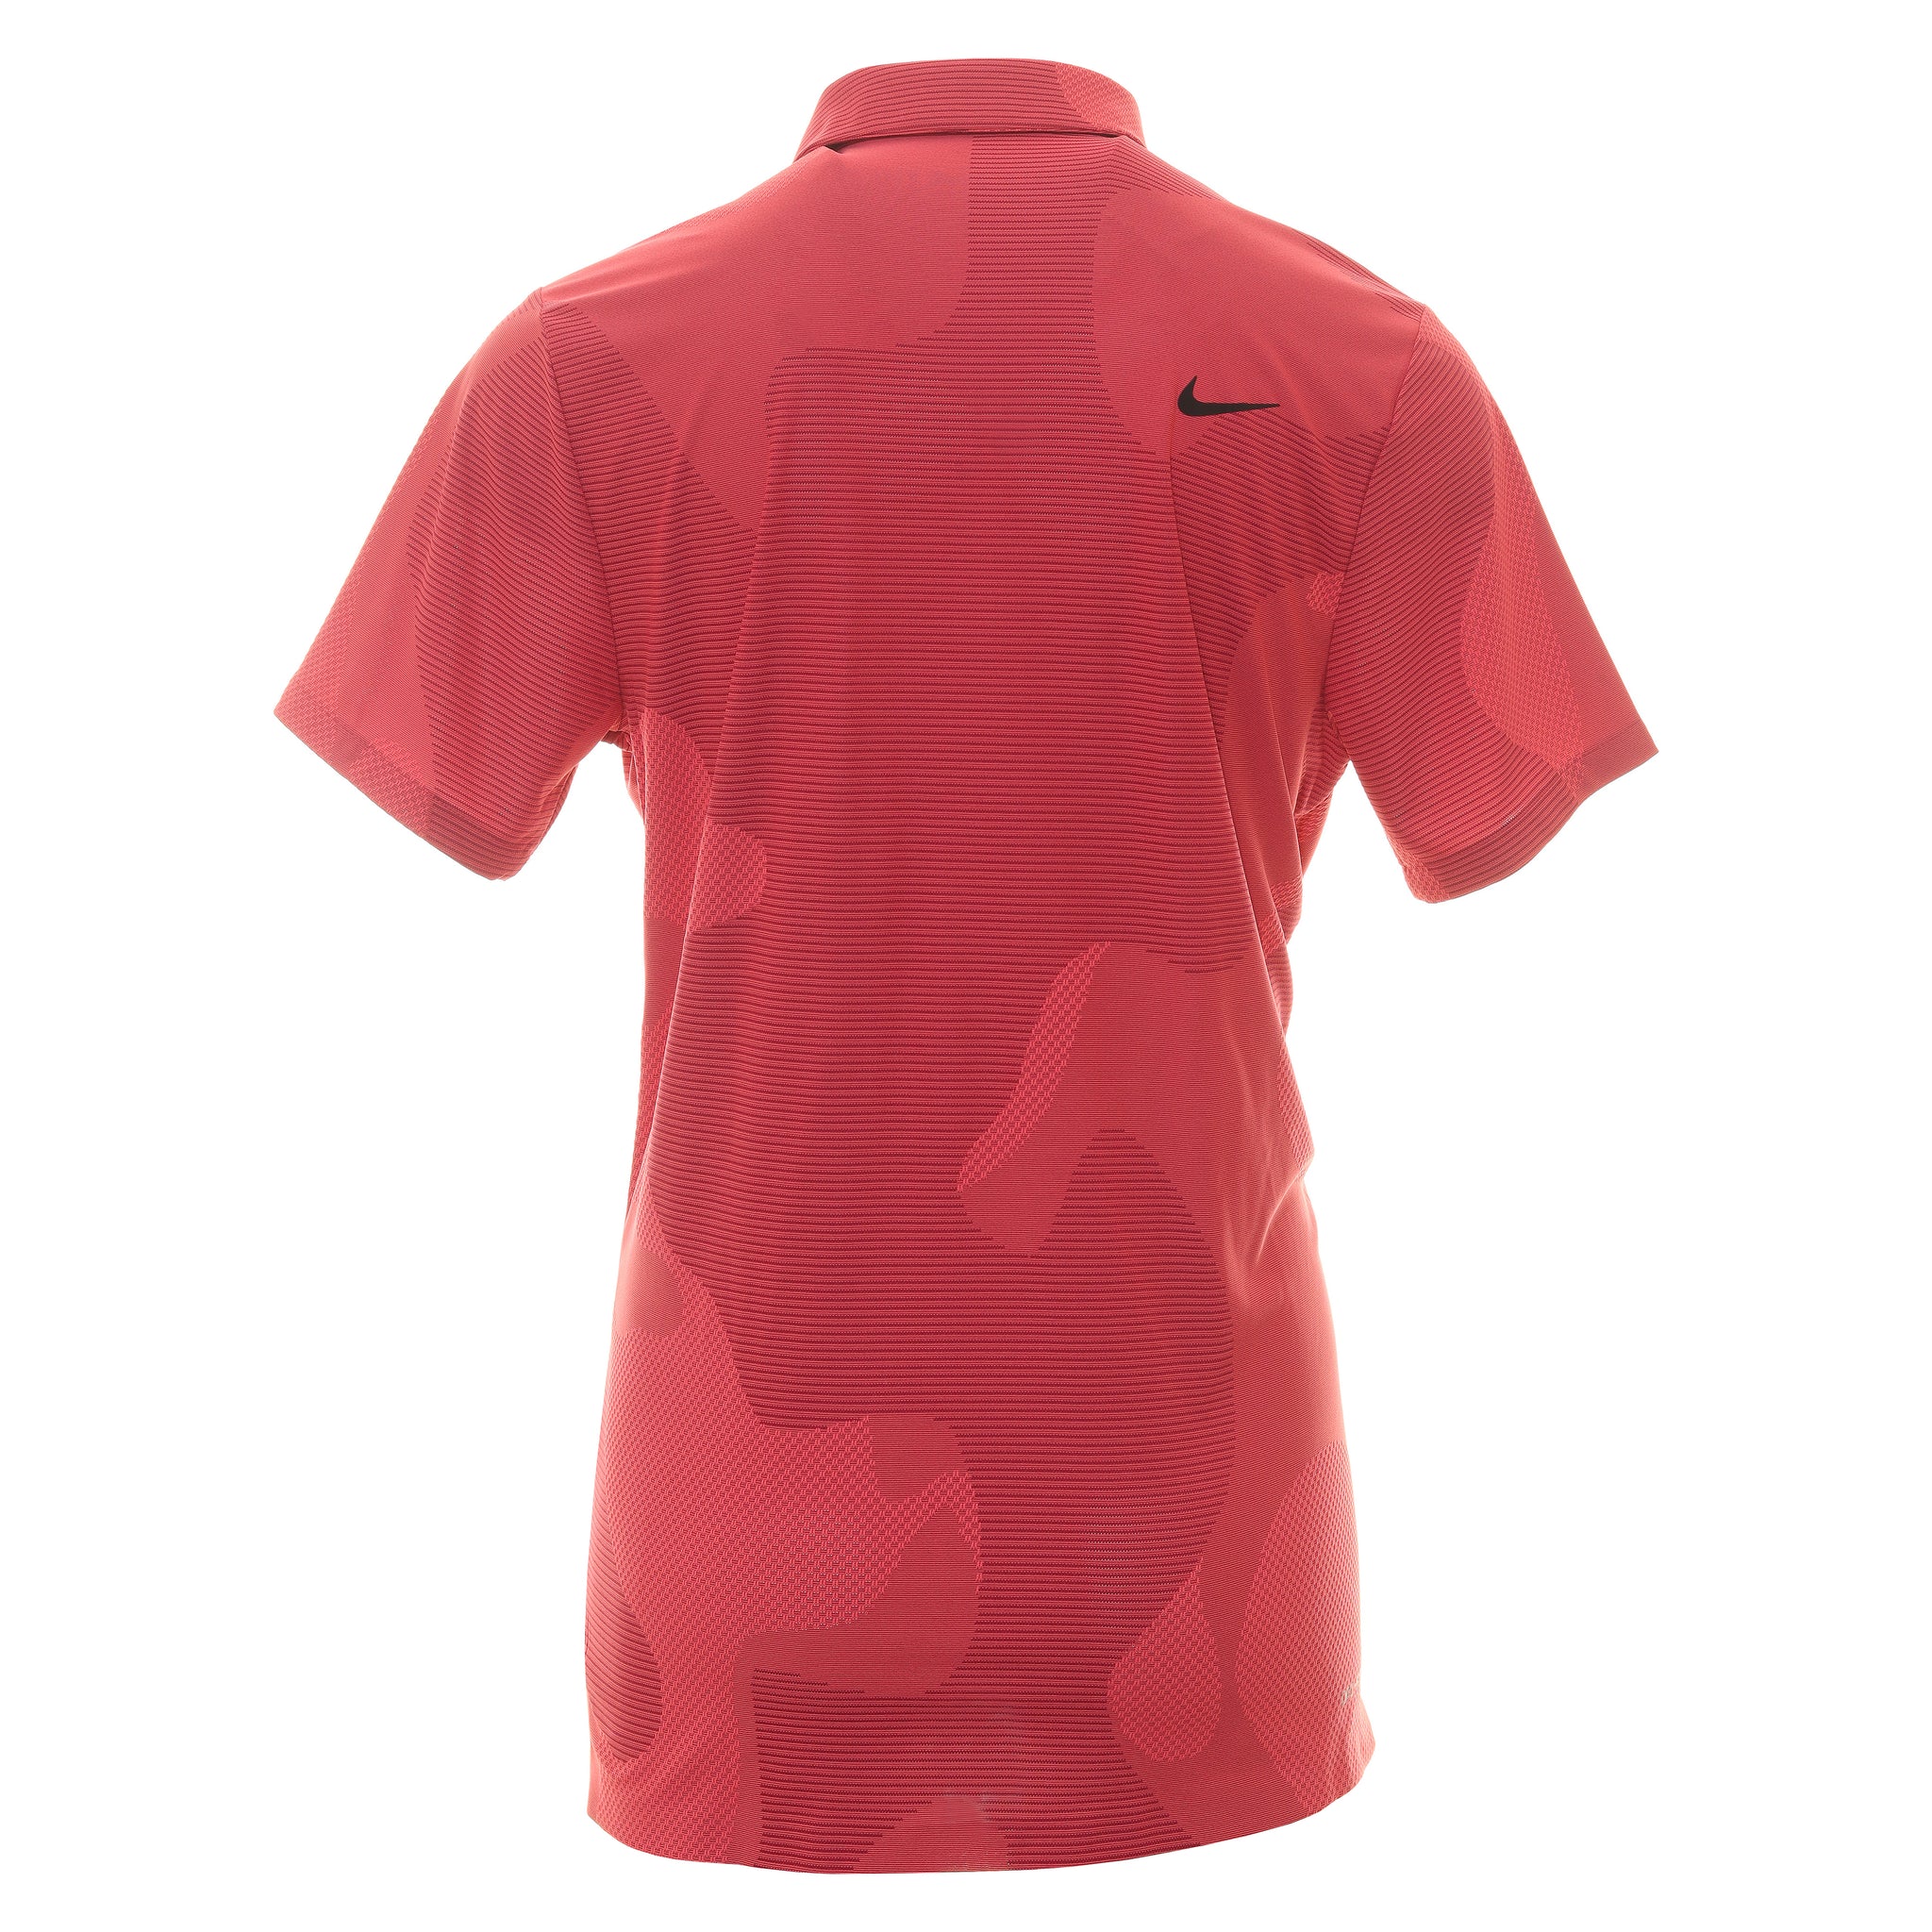 nike-golf-dri-fit-adv-tour-camo-shirt-dr5312-noble-red-620-function18